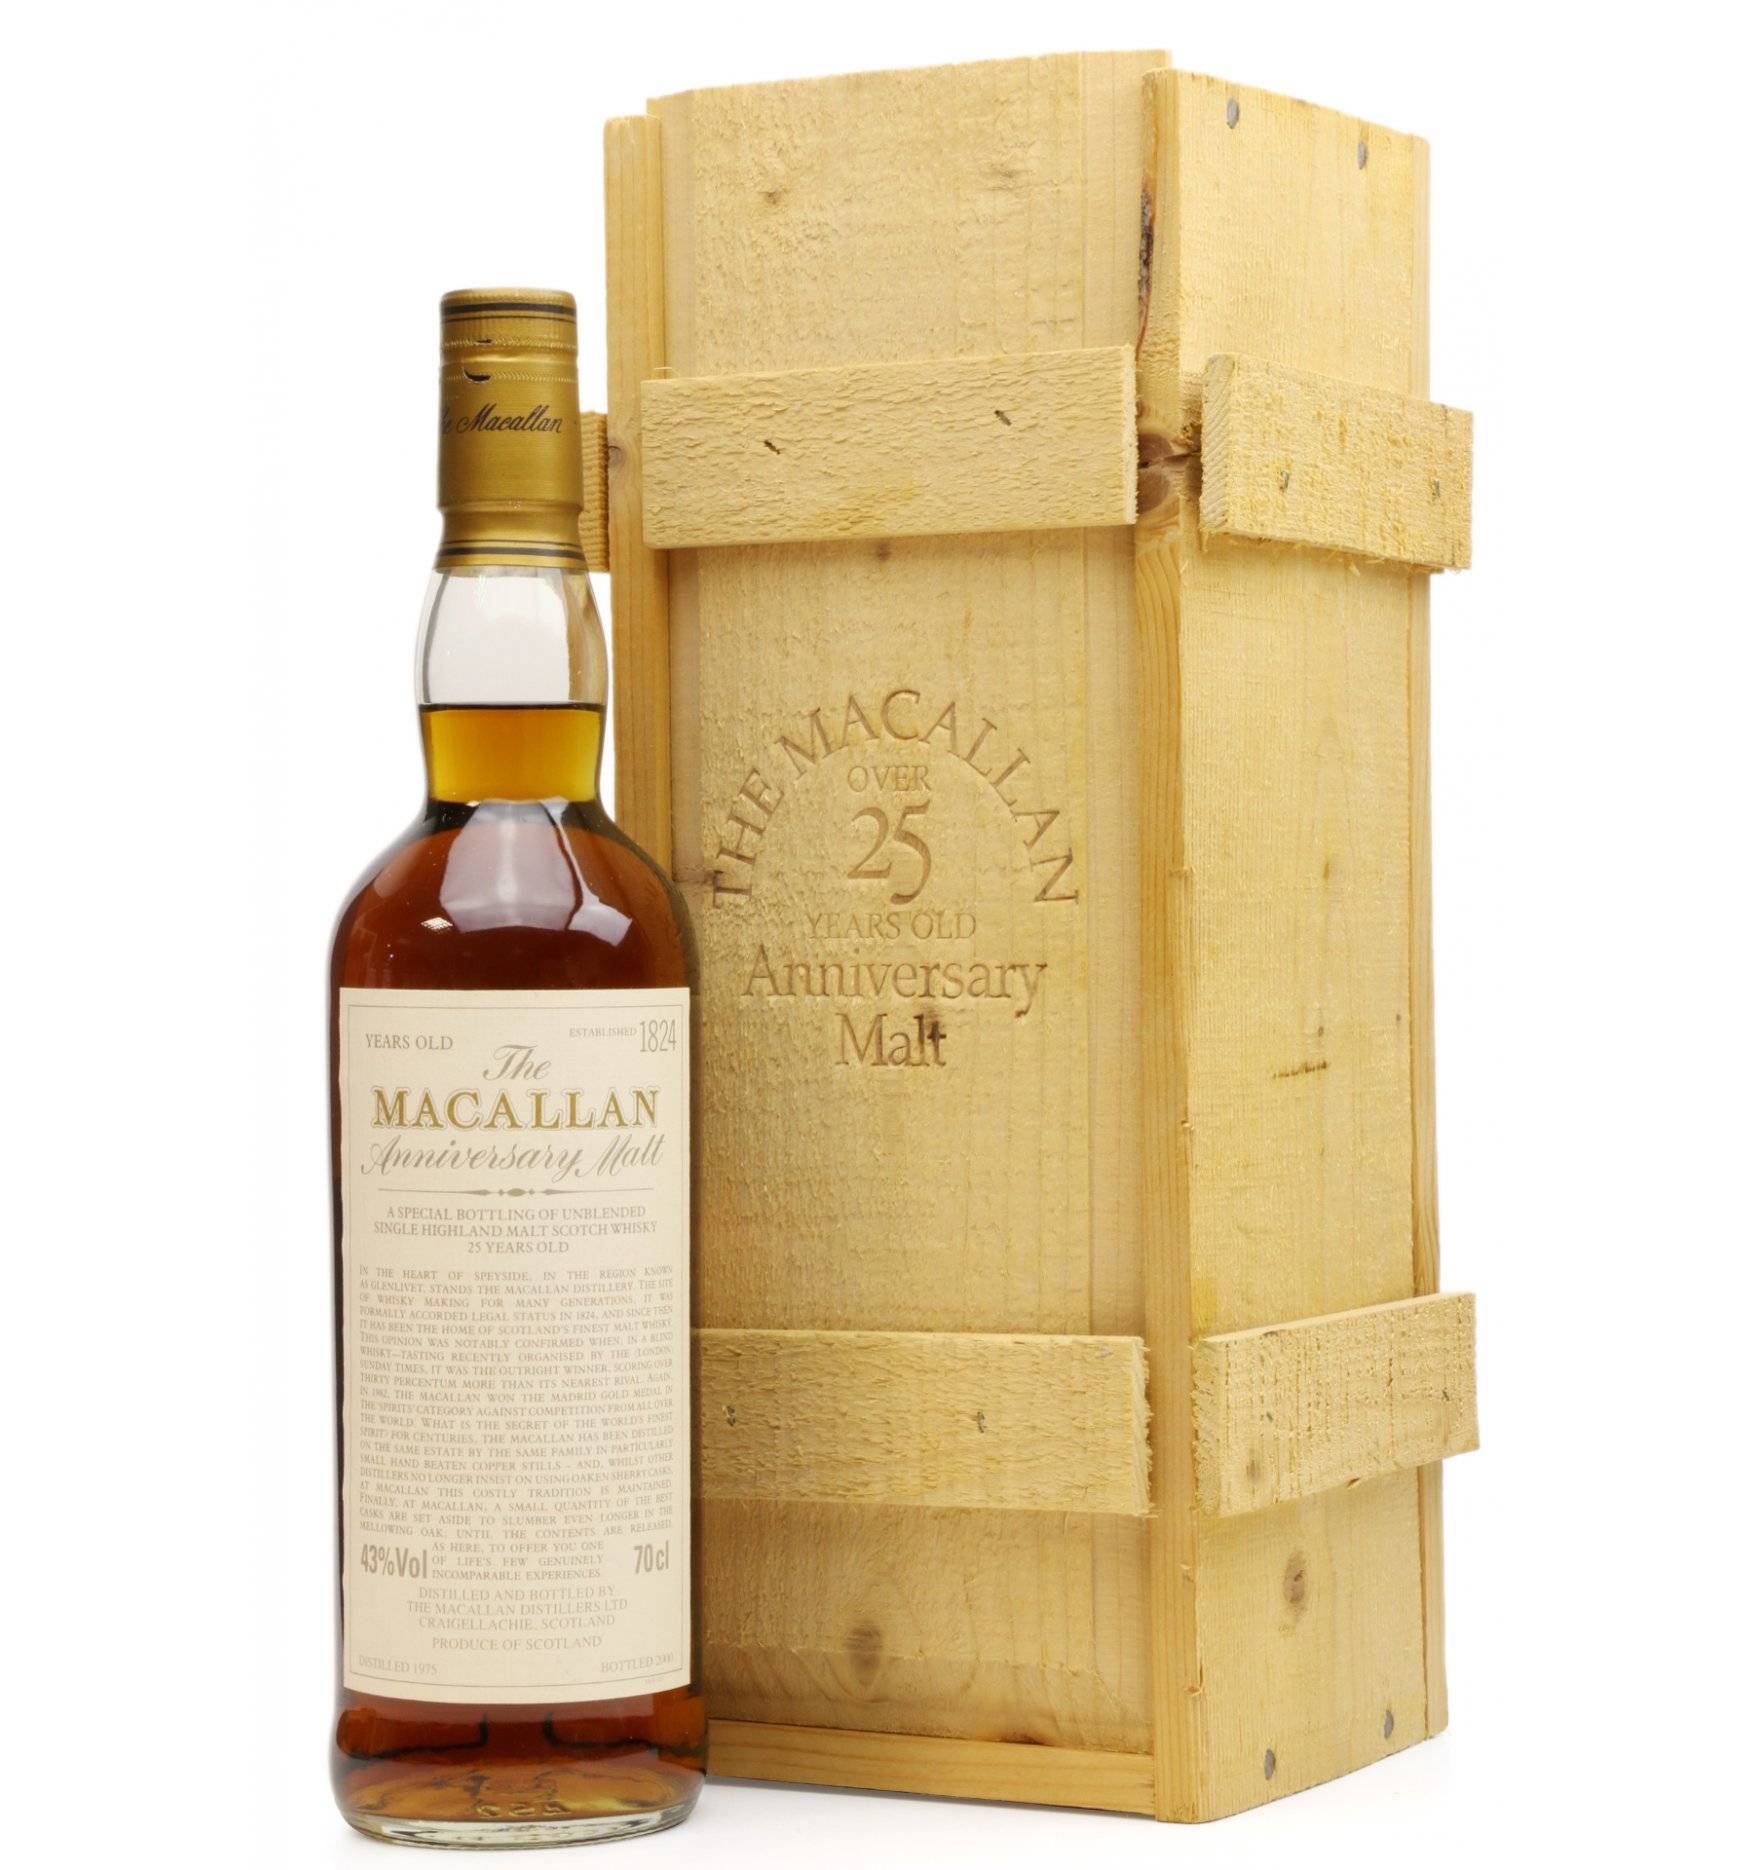 Macallan Over 25 Years Old 1975 Anniversary Malt Just Whisky Auctions